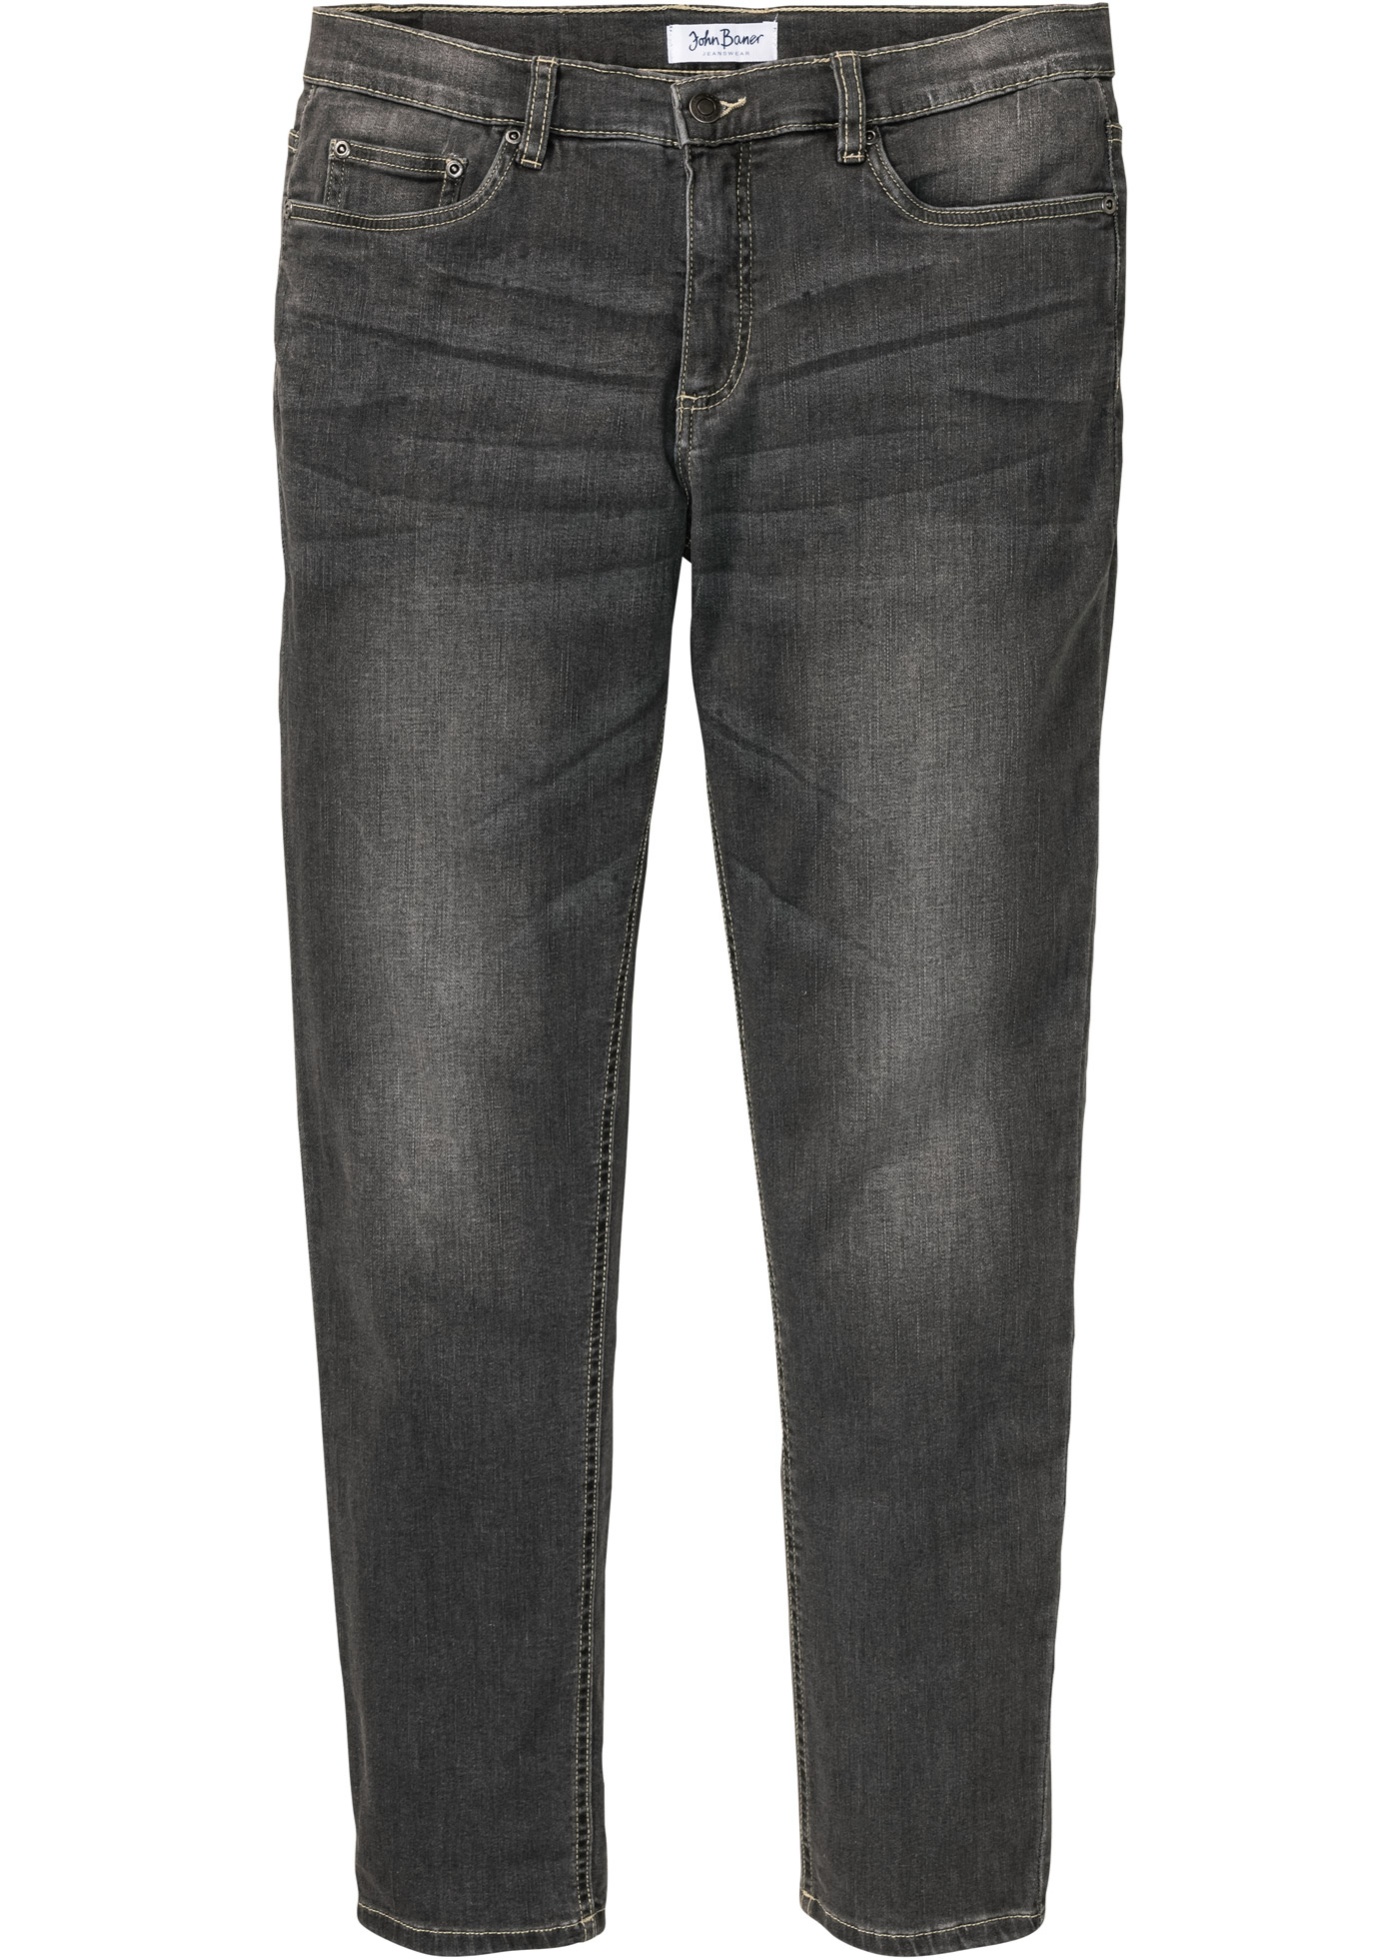 Regular fit stretch jeans, tapered